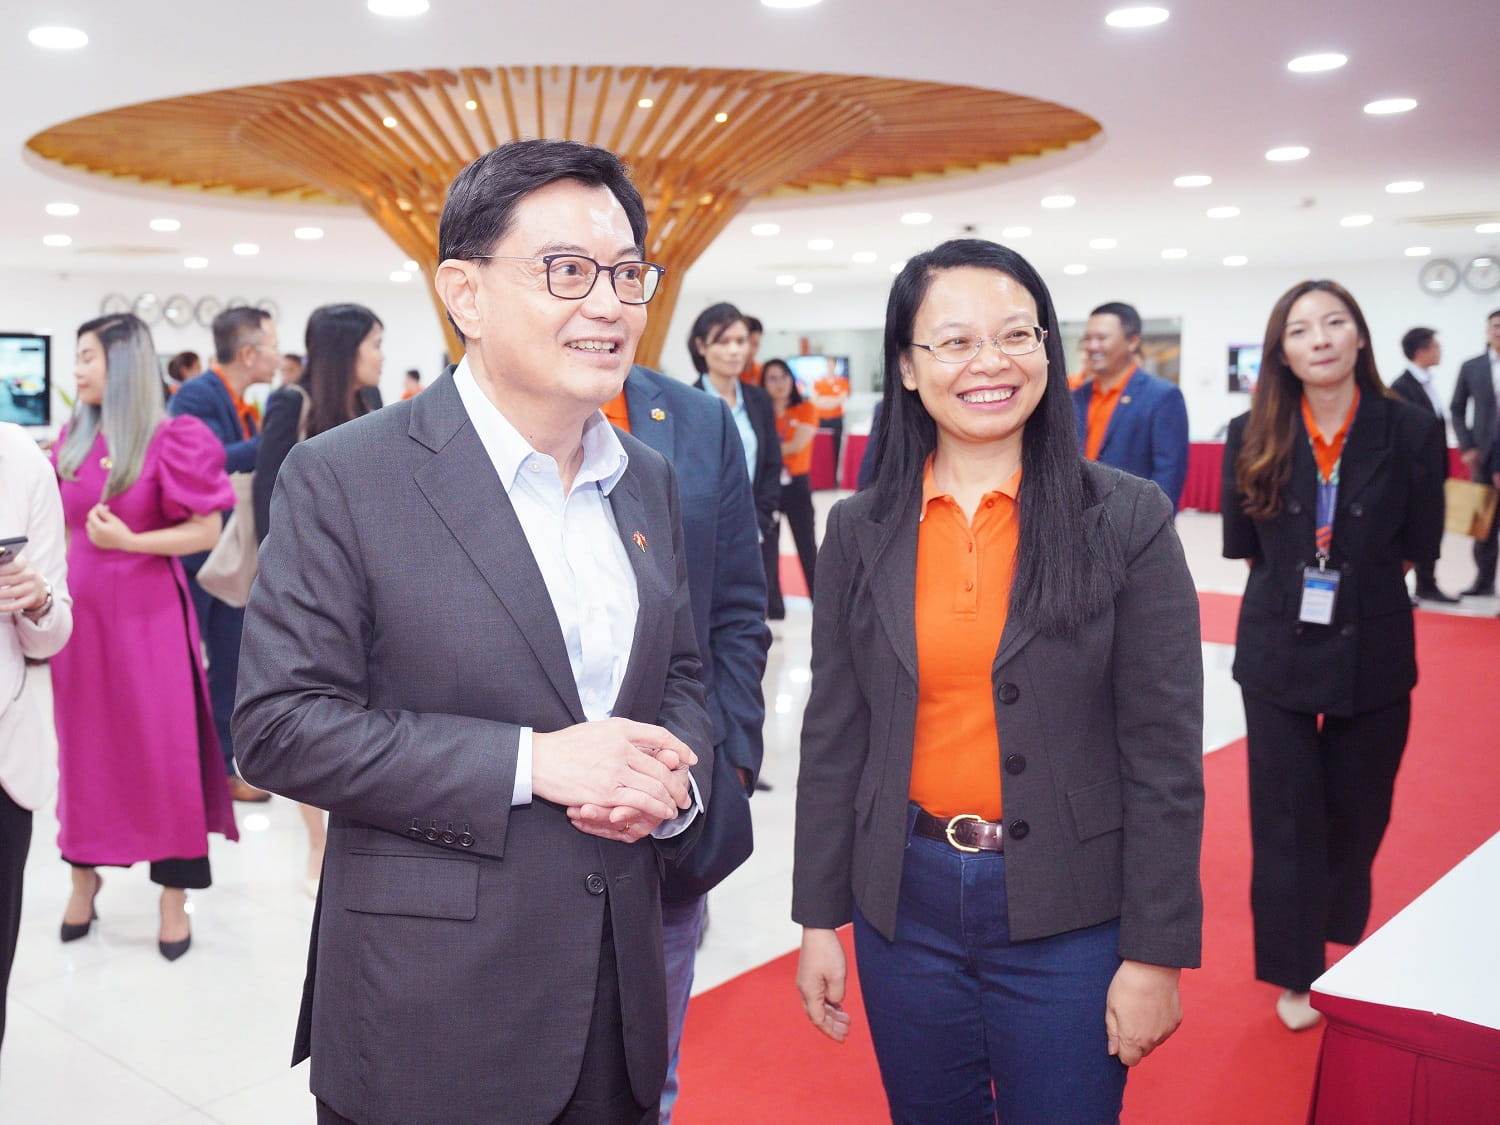 FPT Software's Chairwoman Chu Thi Thanh Ha (right) introduced the campus to Singapore's Deputy Prime Minister